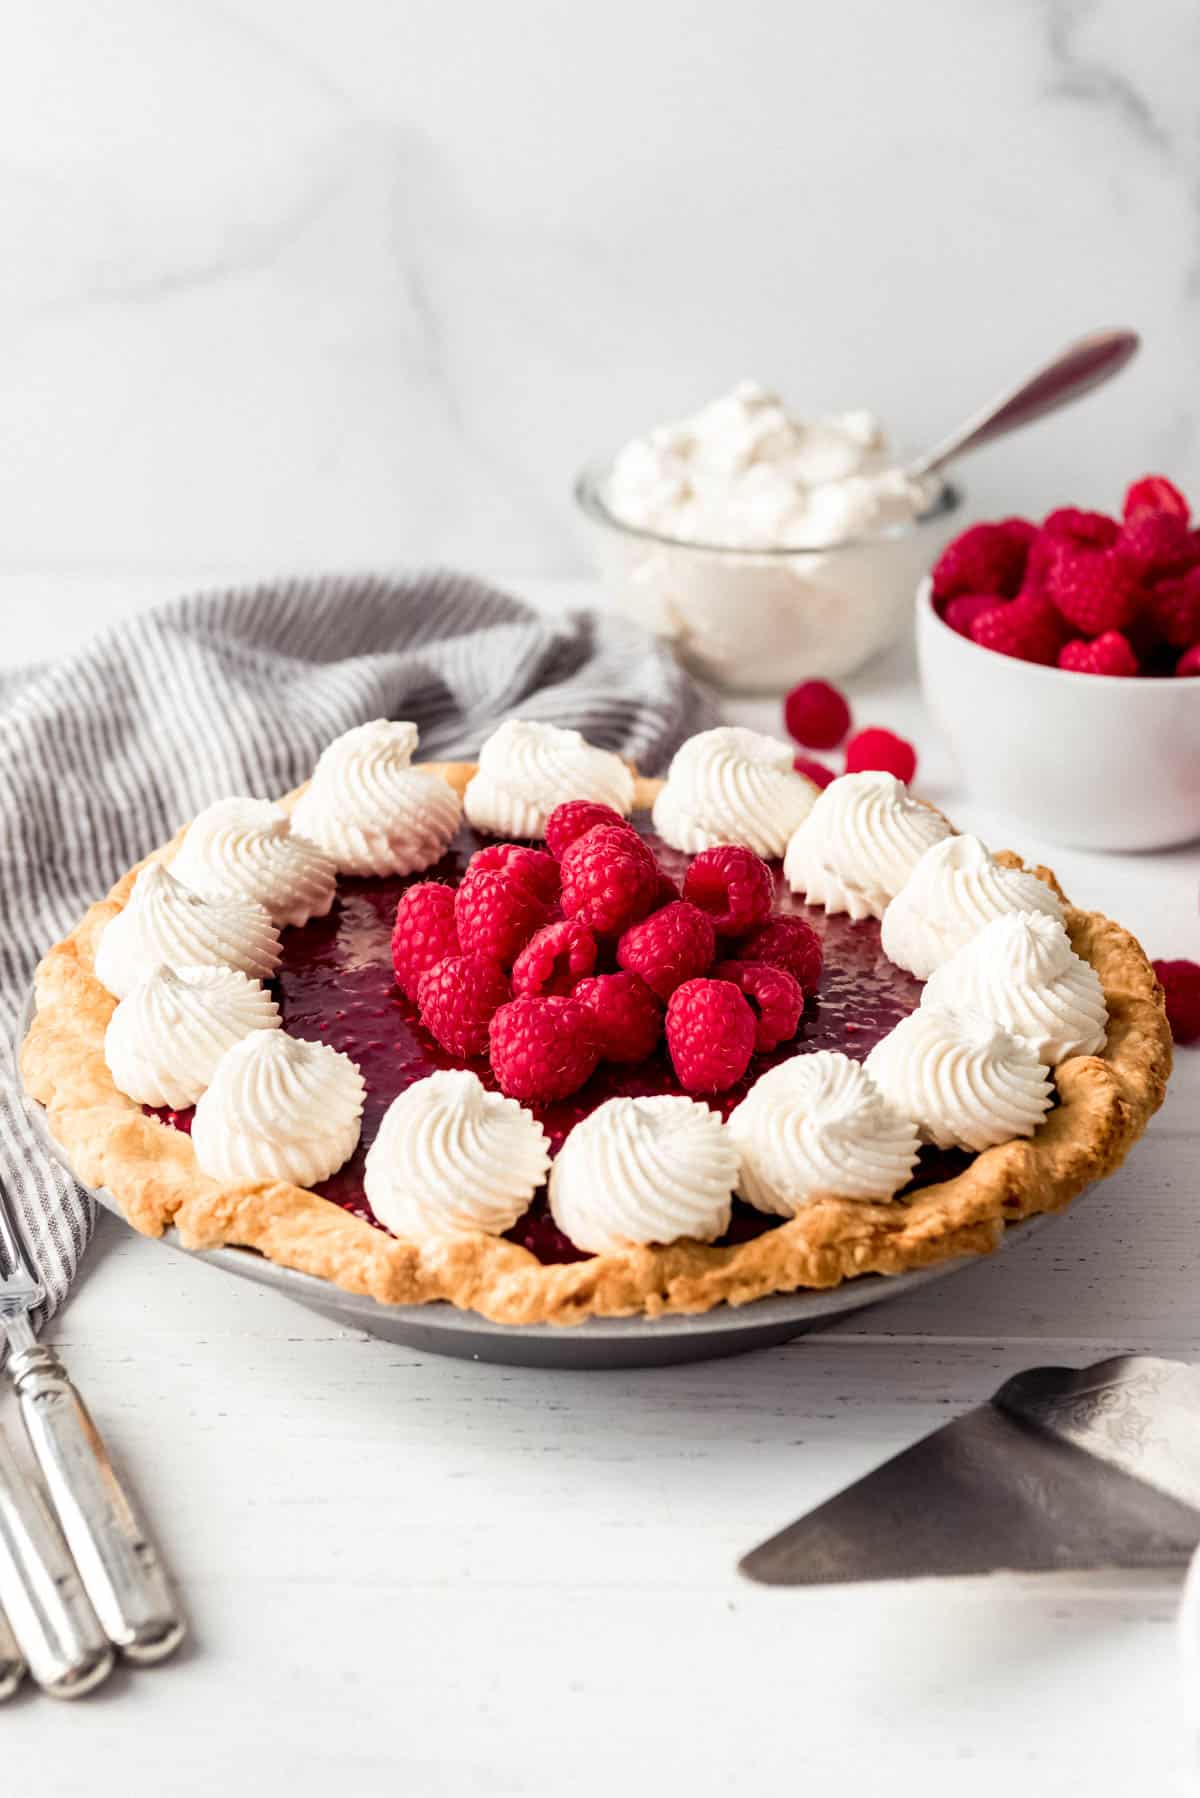 a raspberry pie topped with whipped cream in front of bowls of whipped cream and raspberries